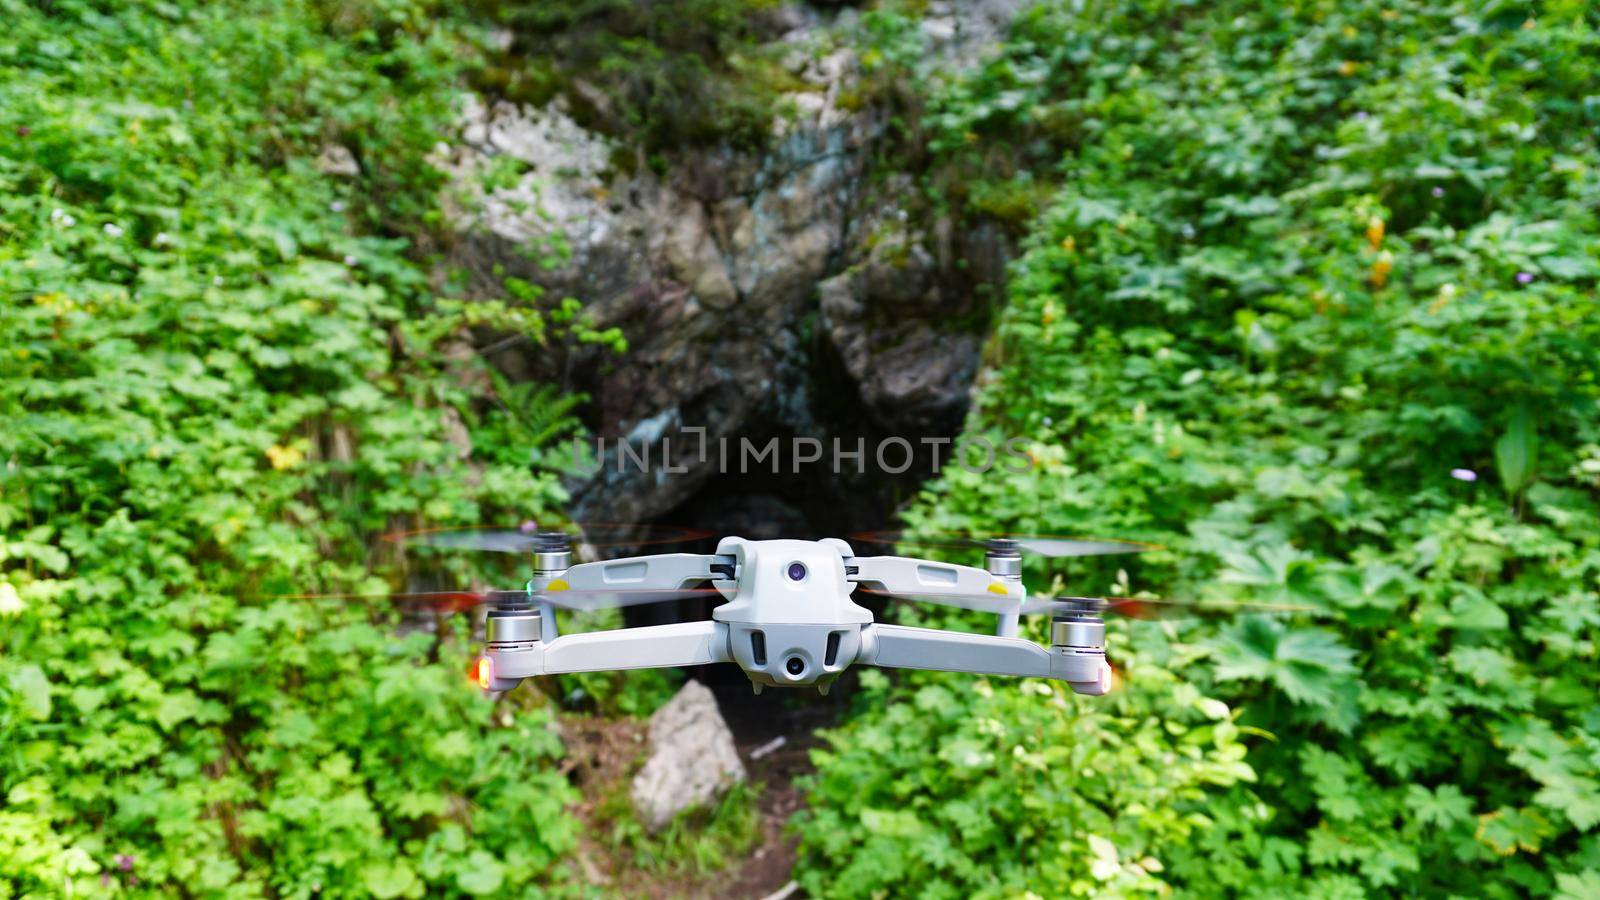 A quadcopter on the background of a green rocky gorge with the entrance to the cave. A gray drone hovers in air, red-orange lights glow, propellers spin. Blurred background with a view of tunnel path